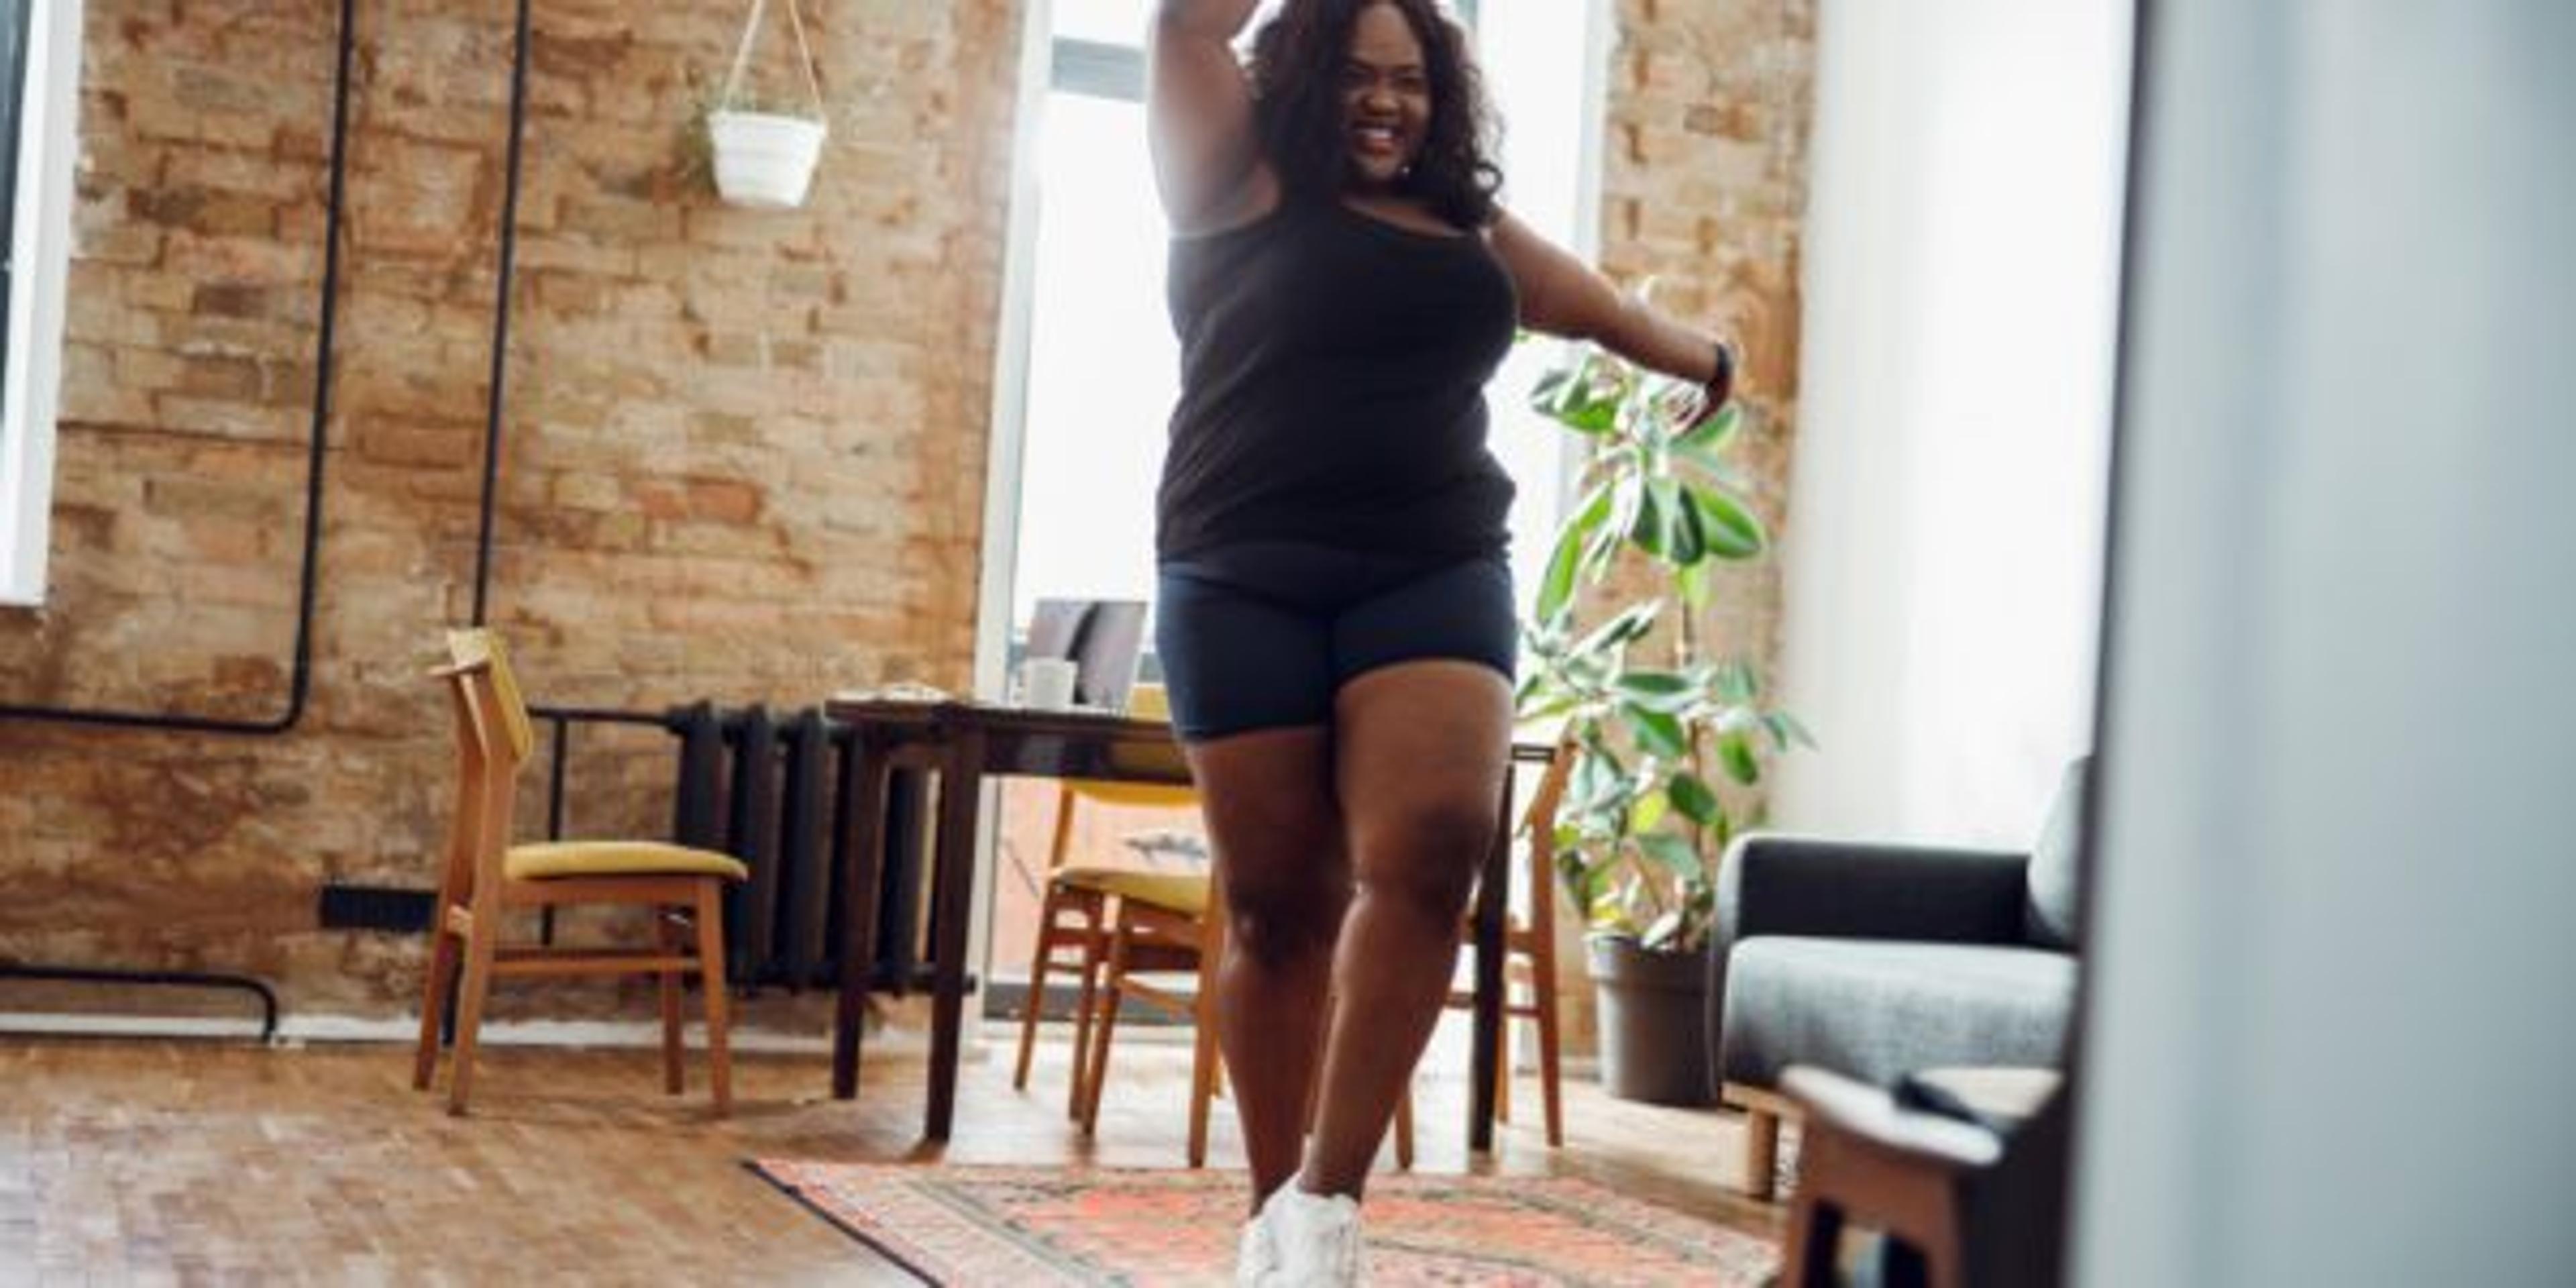 woman dances alone in her apartment as a non-diet way to keep a healthy weight